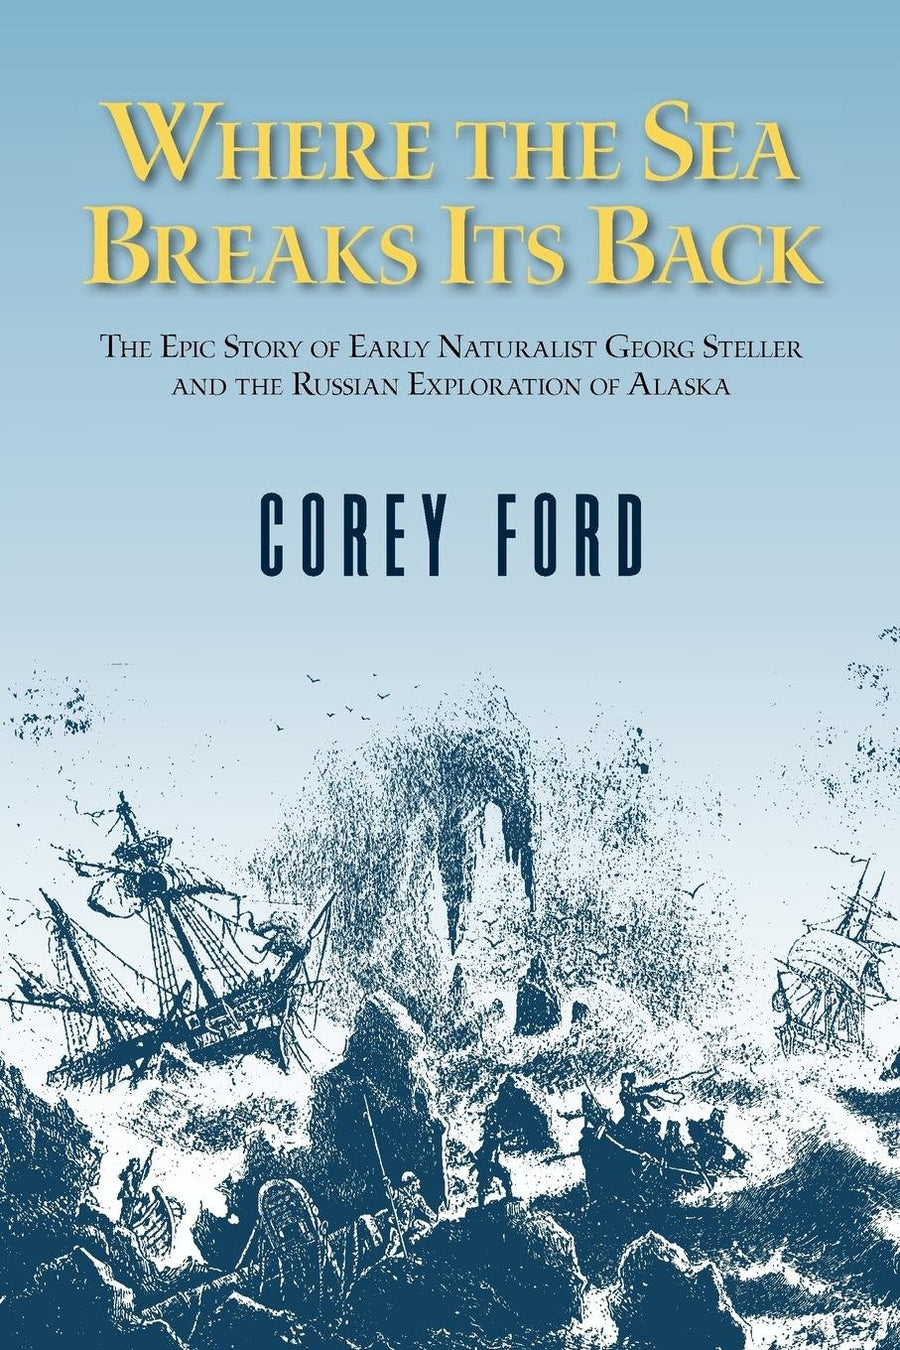 Where the Sea Breaks Its Back by Corey Ford